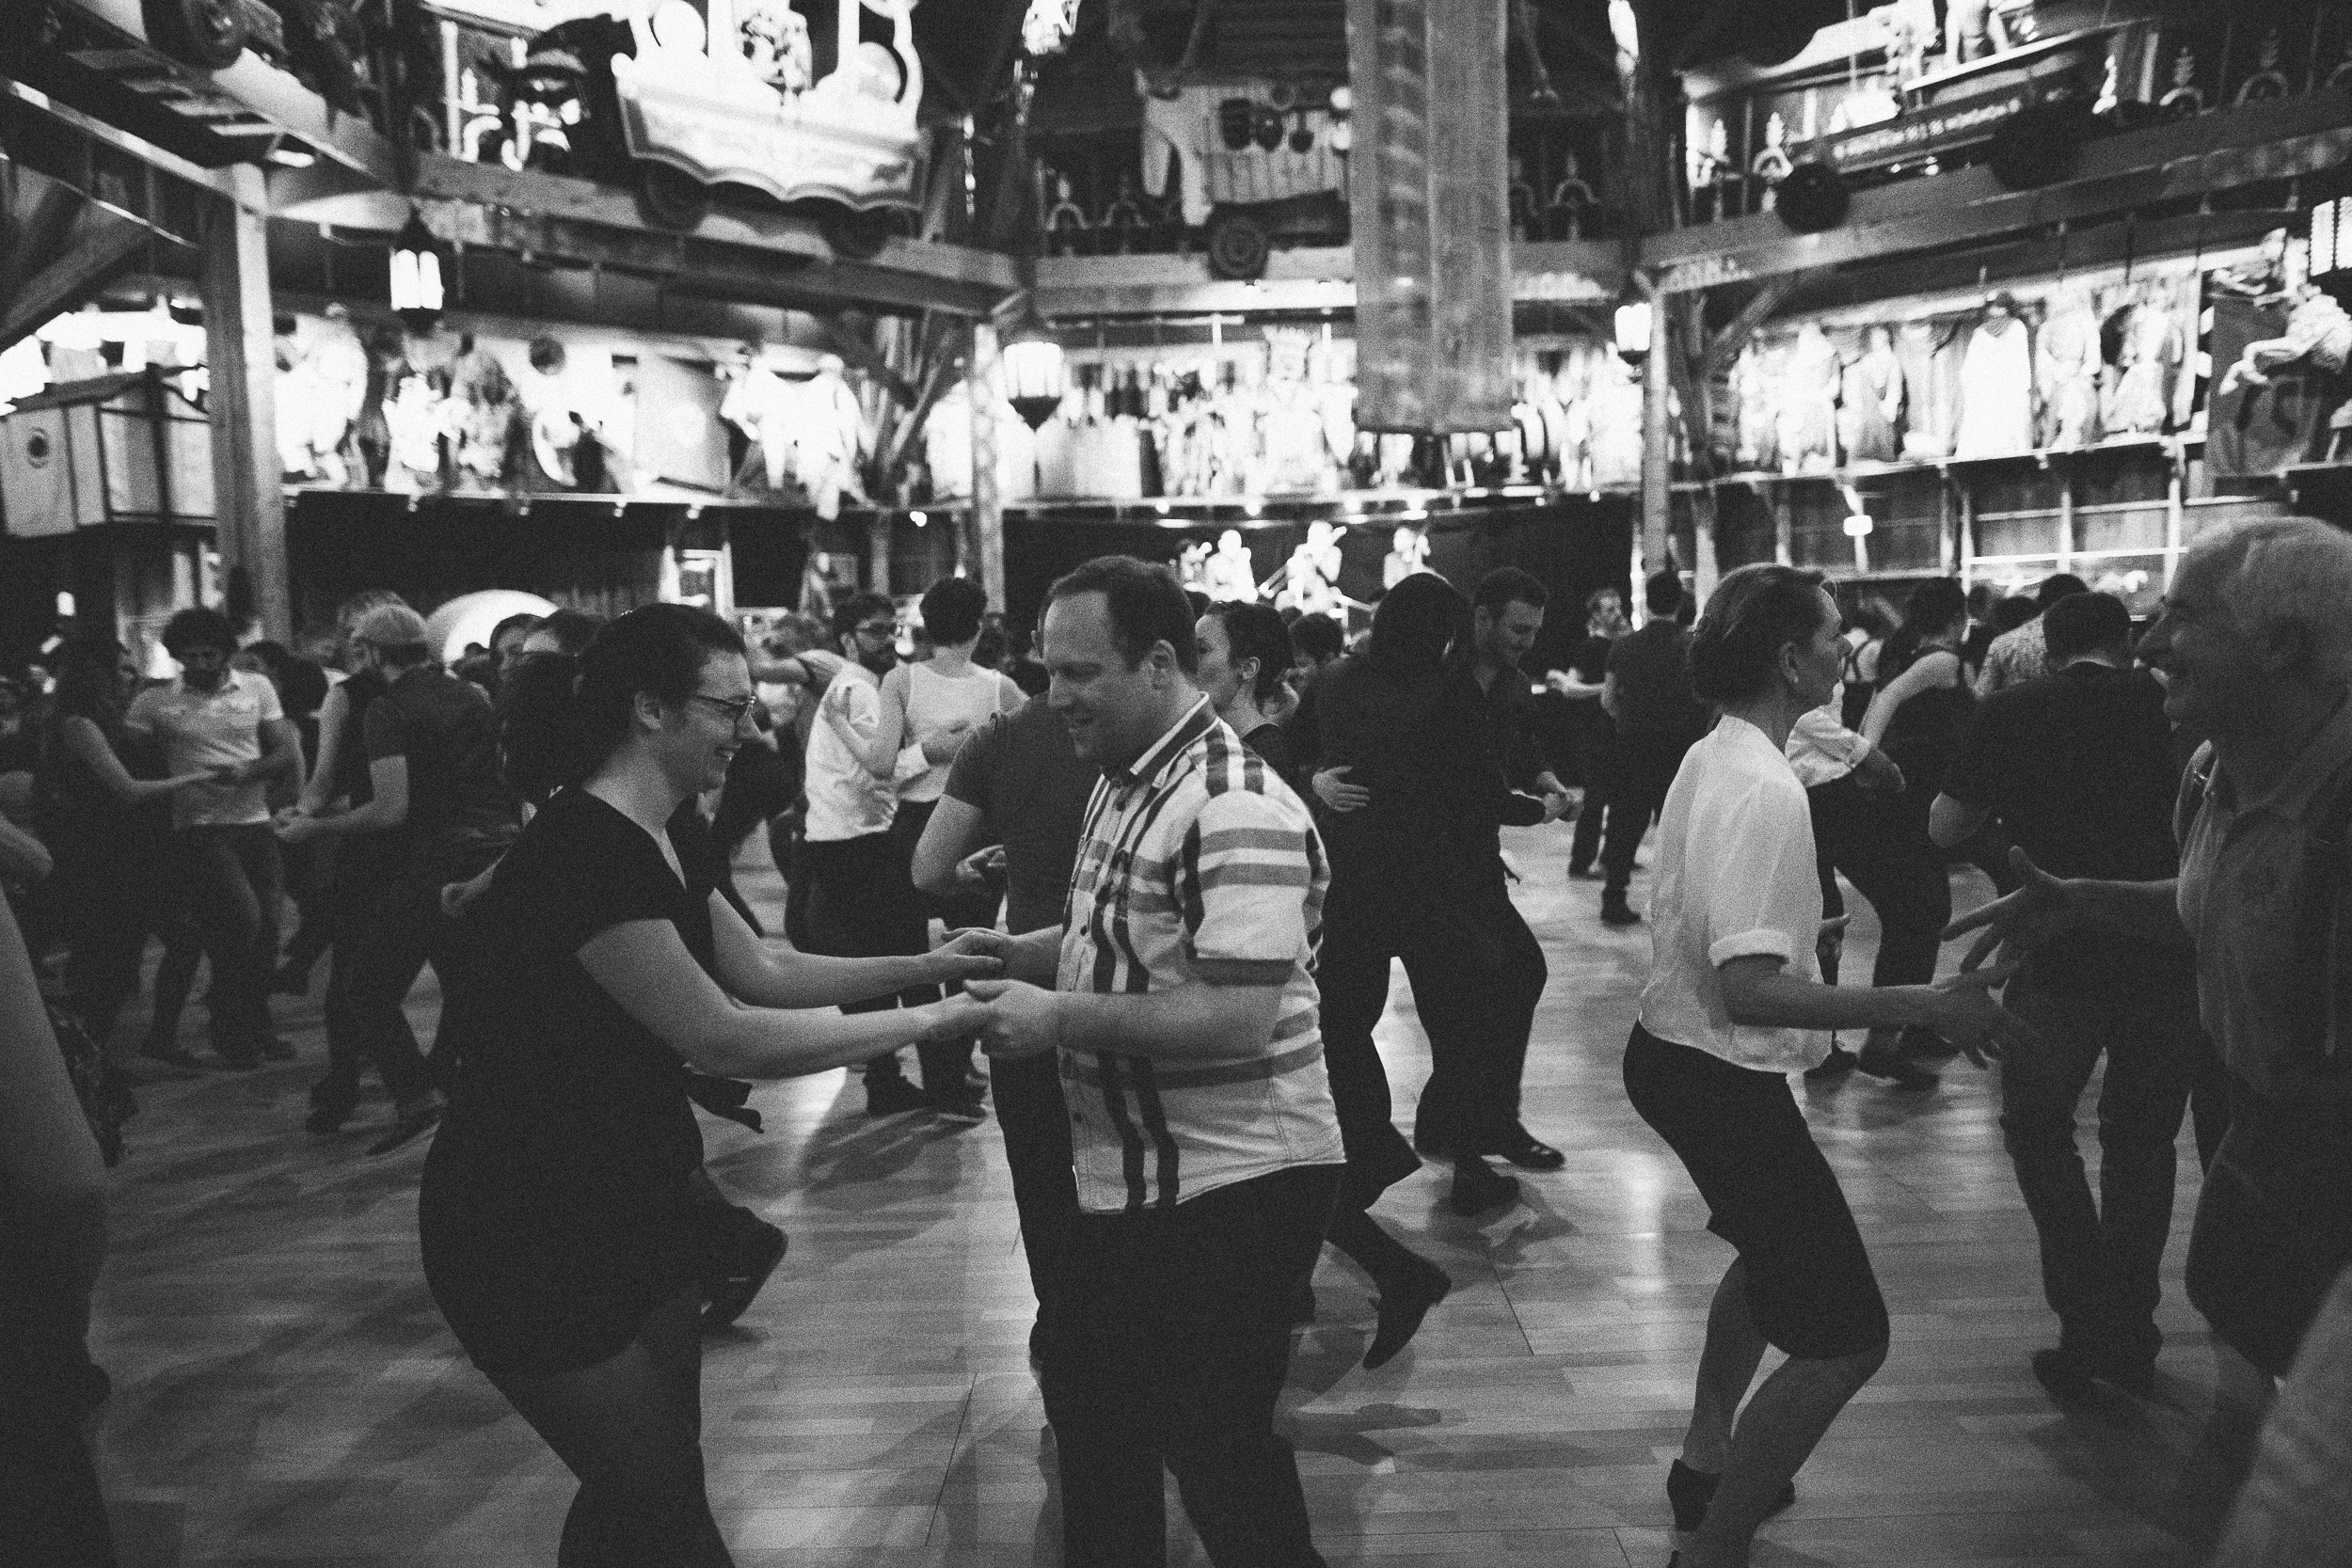  Nuit Swing à Zingaro - Photo Credit: For Dancers Only - http://www.ebobrie.com/nuit-swing-19032016 